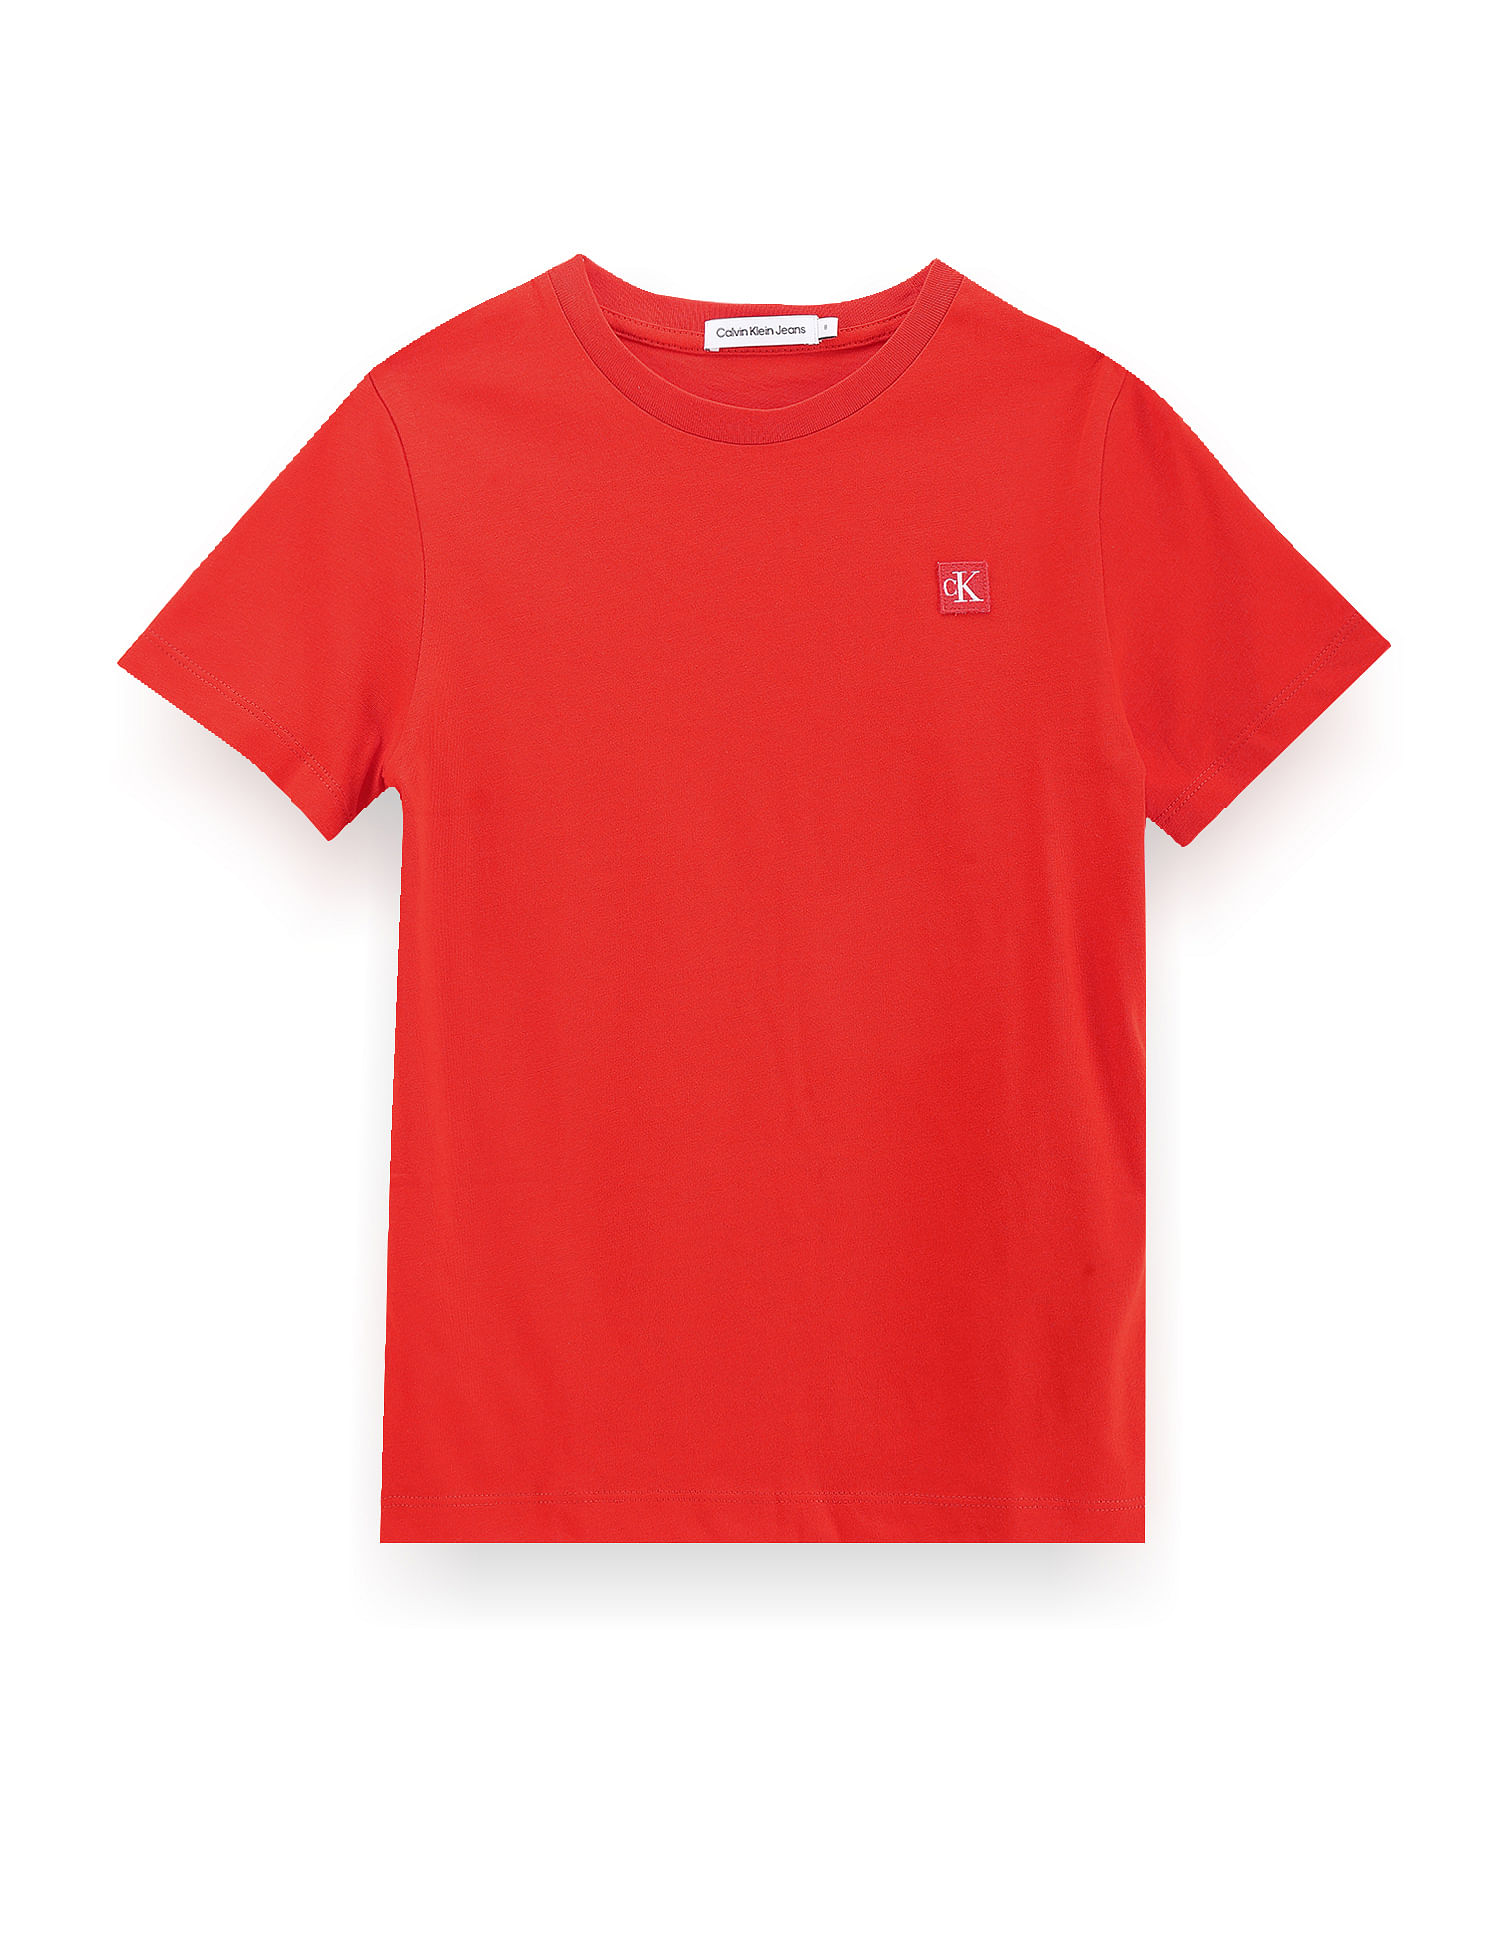 Calvin Klein Jeans white t-shirt with red CK logo